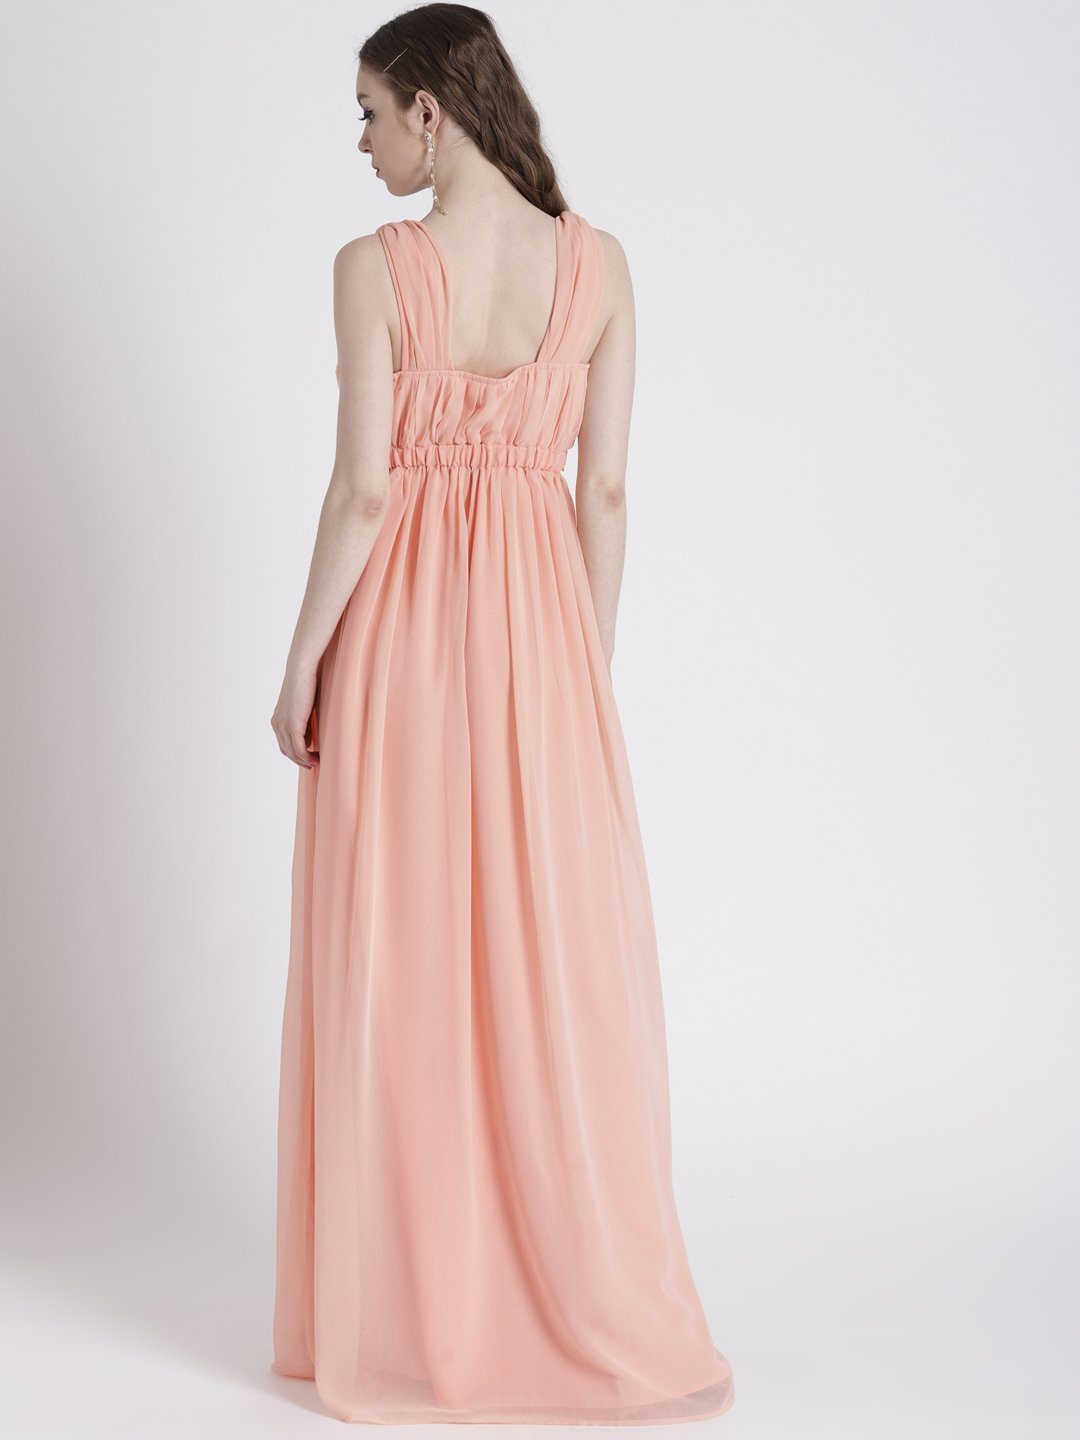 PEACH V-NECKLINE GOWN WITH BROOCH DETAIL